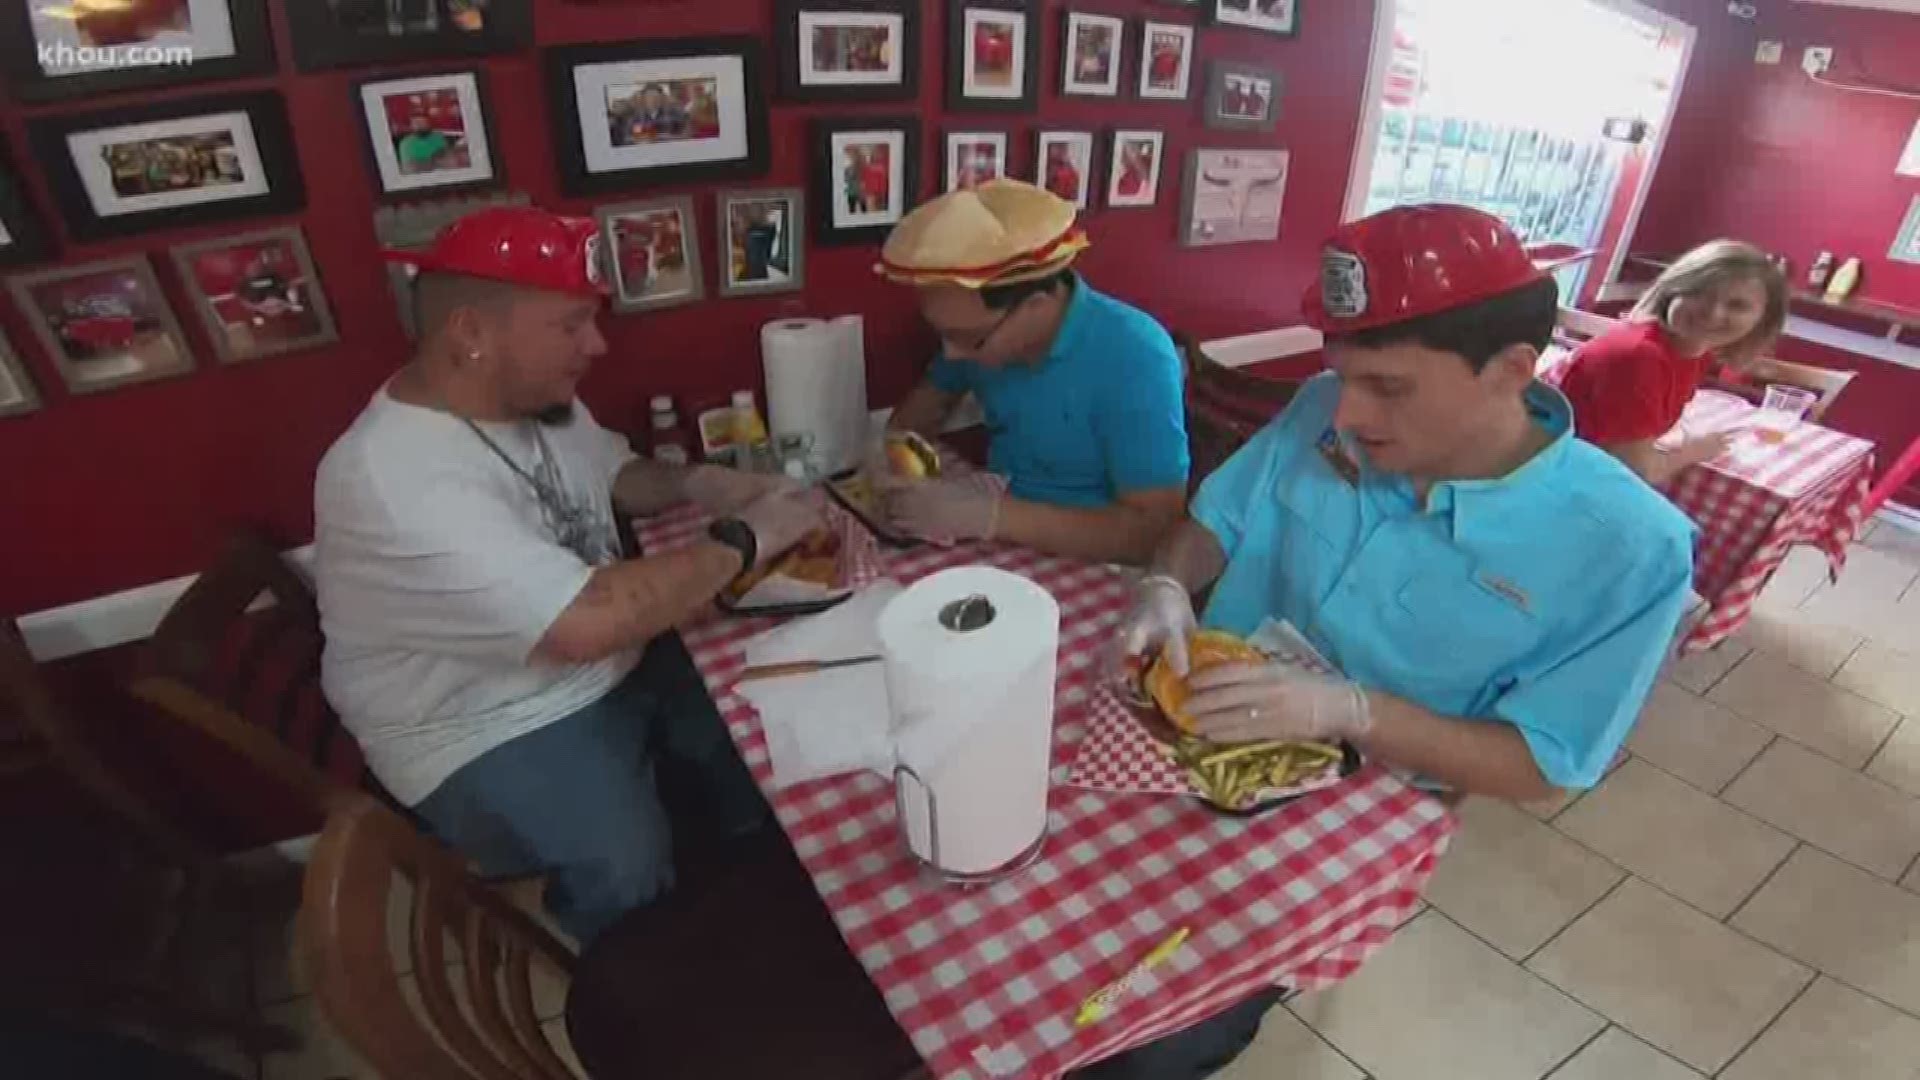 At the Little Bitty Burger Barn, three guys tackle the hottest burger in Texas.